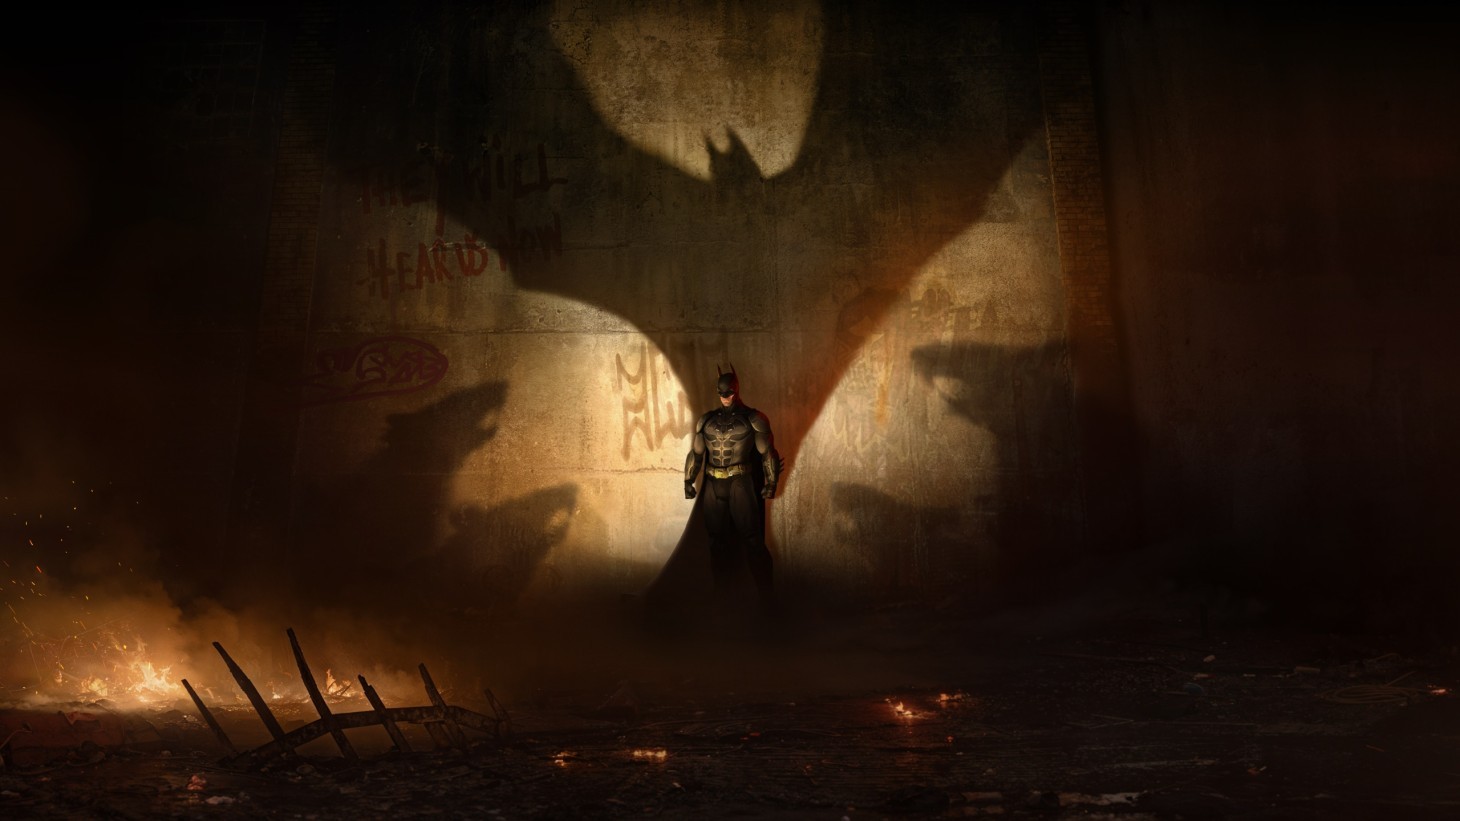 Although not the first Batman Arkham VR game, Shadow looks to be much more ambitious. 